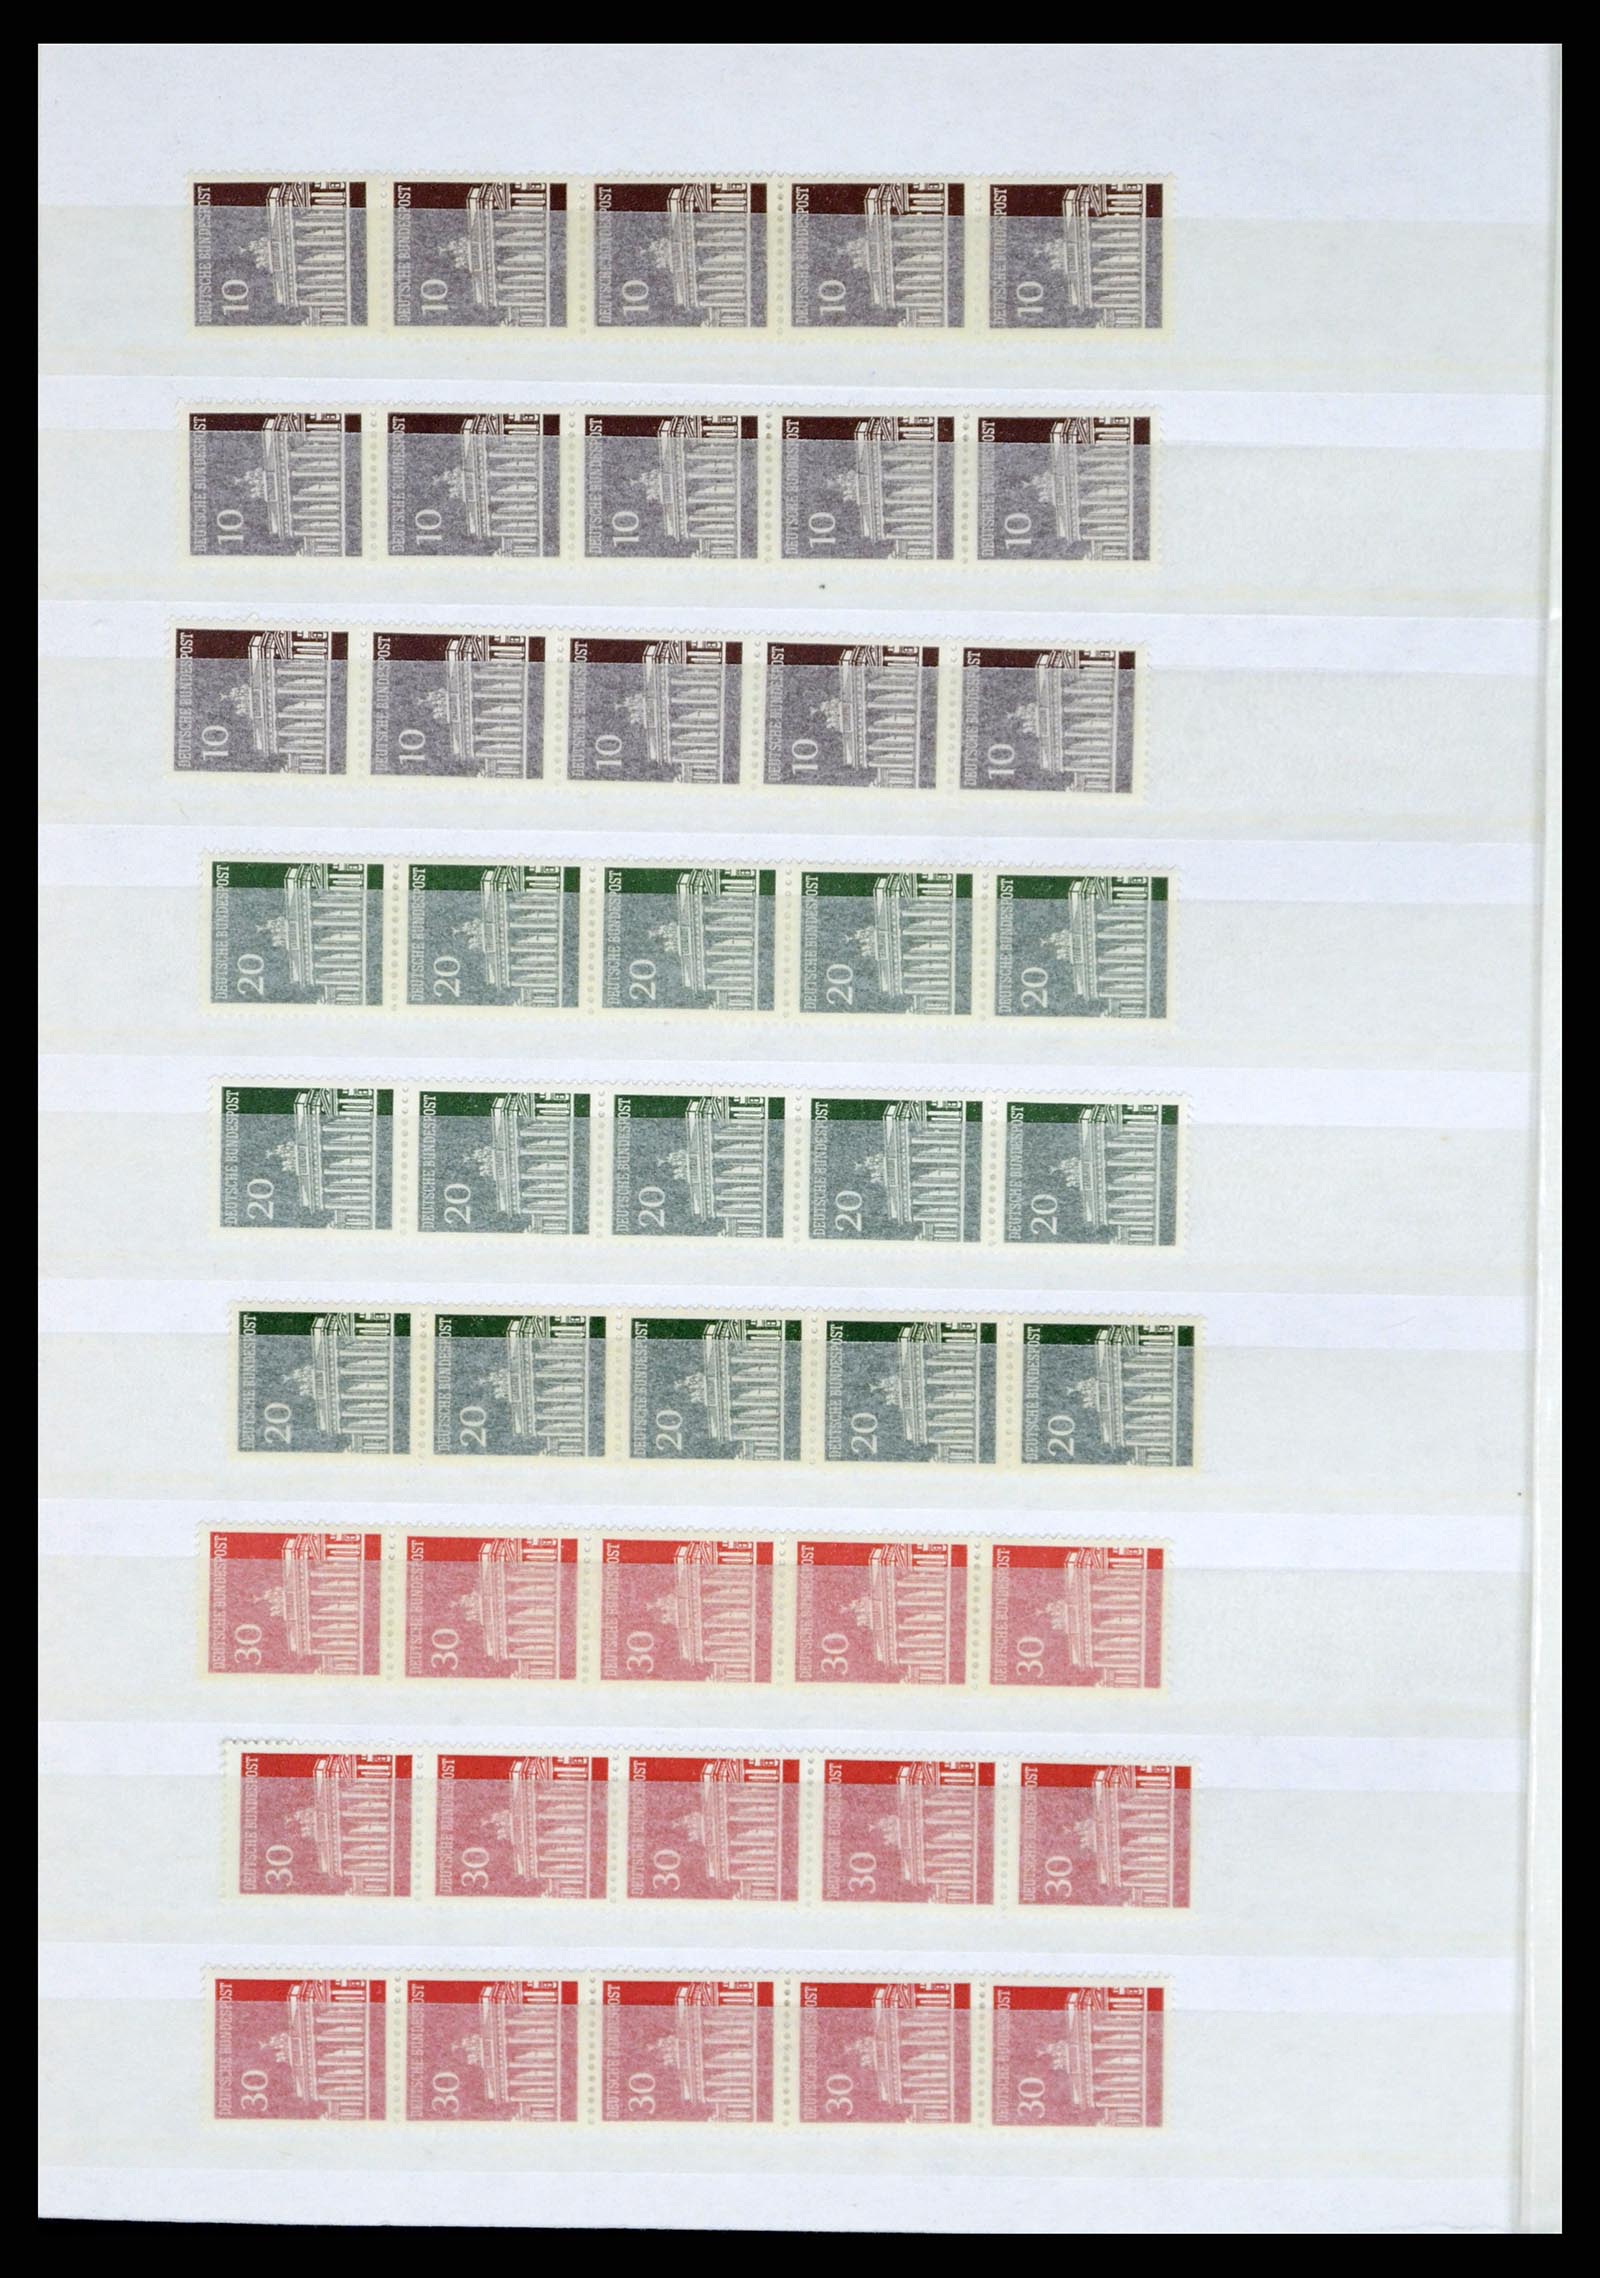 37354 056 - Stamp collection 37354 Bundespost and Berlin 1955-2000.